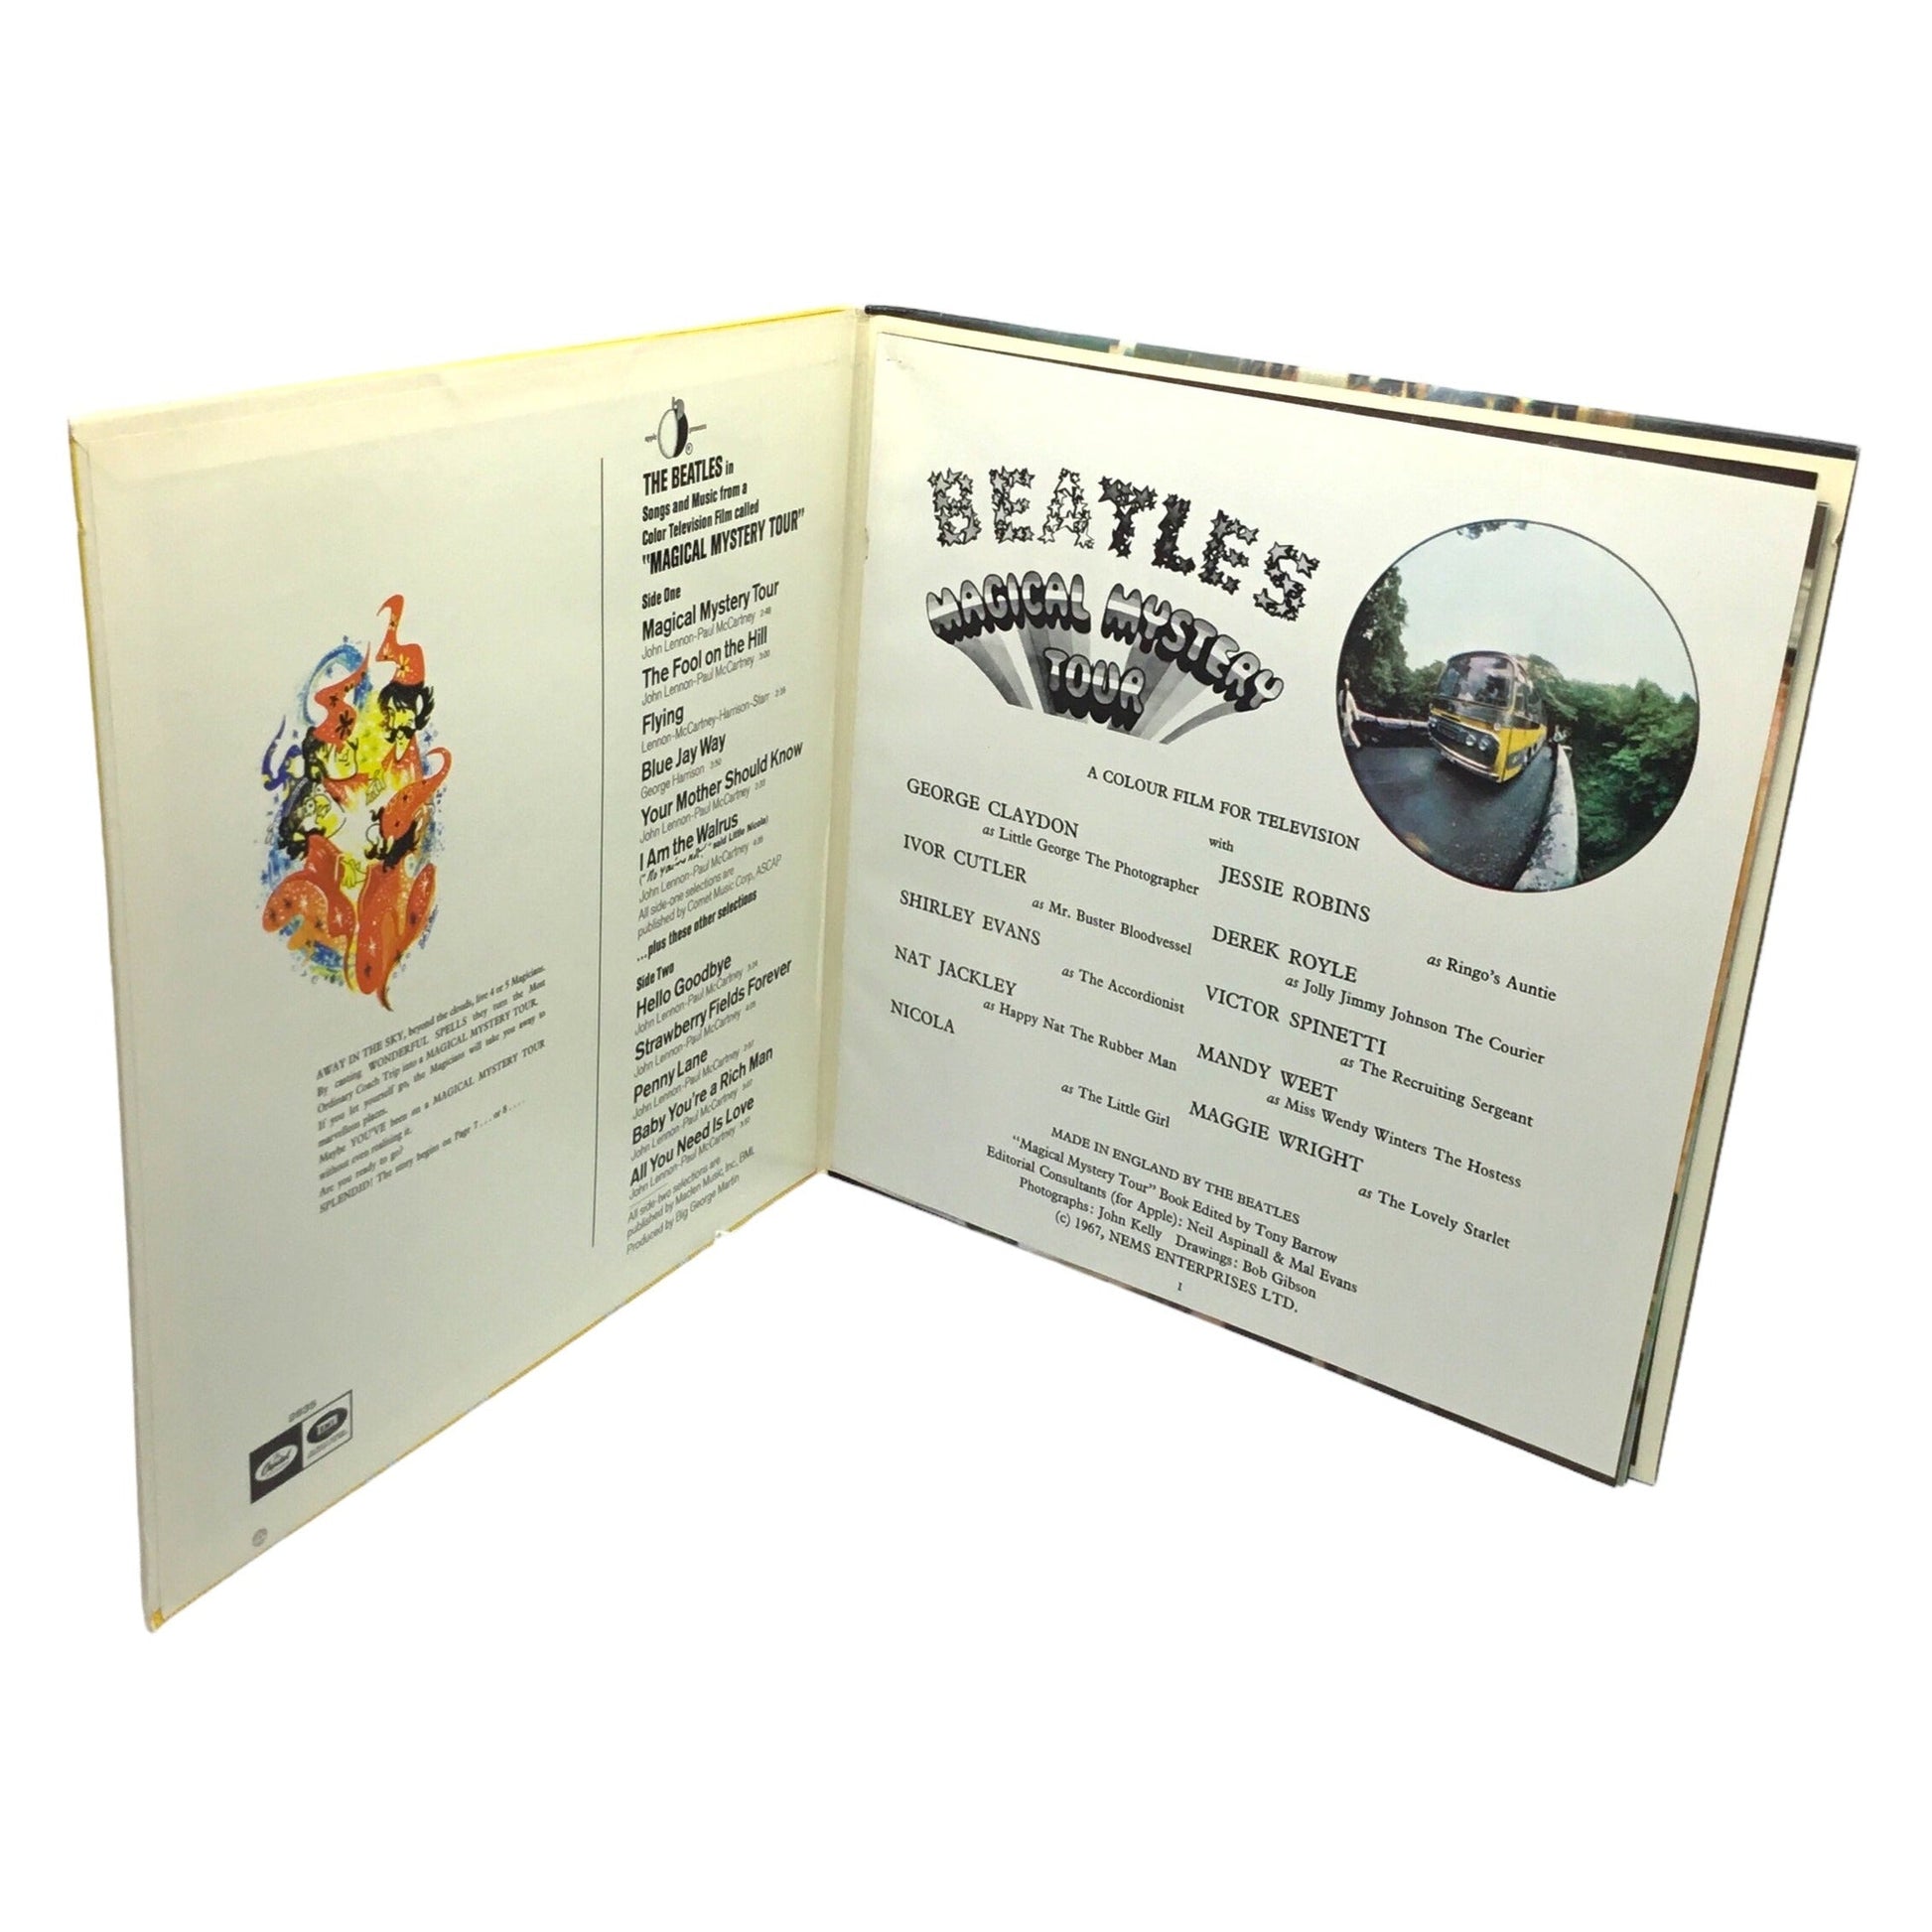 Beatles Magical Mystery Tour Original Apple Stereo SMAL-2835 with 24 page booklet